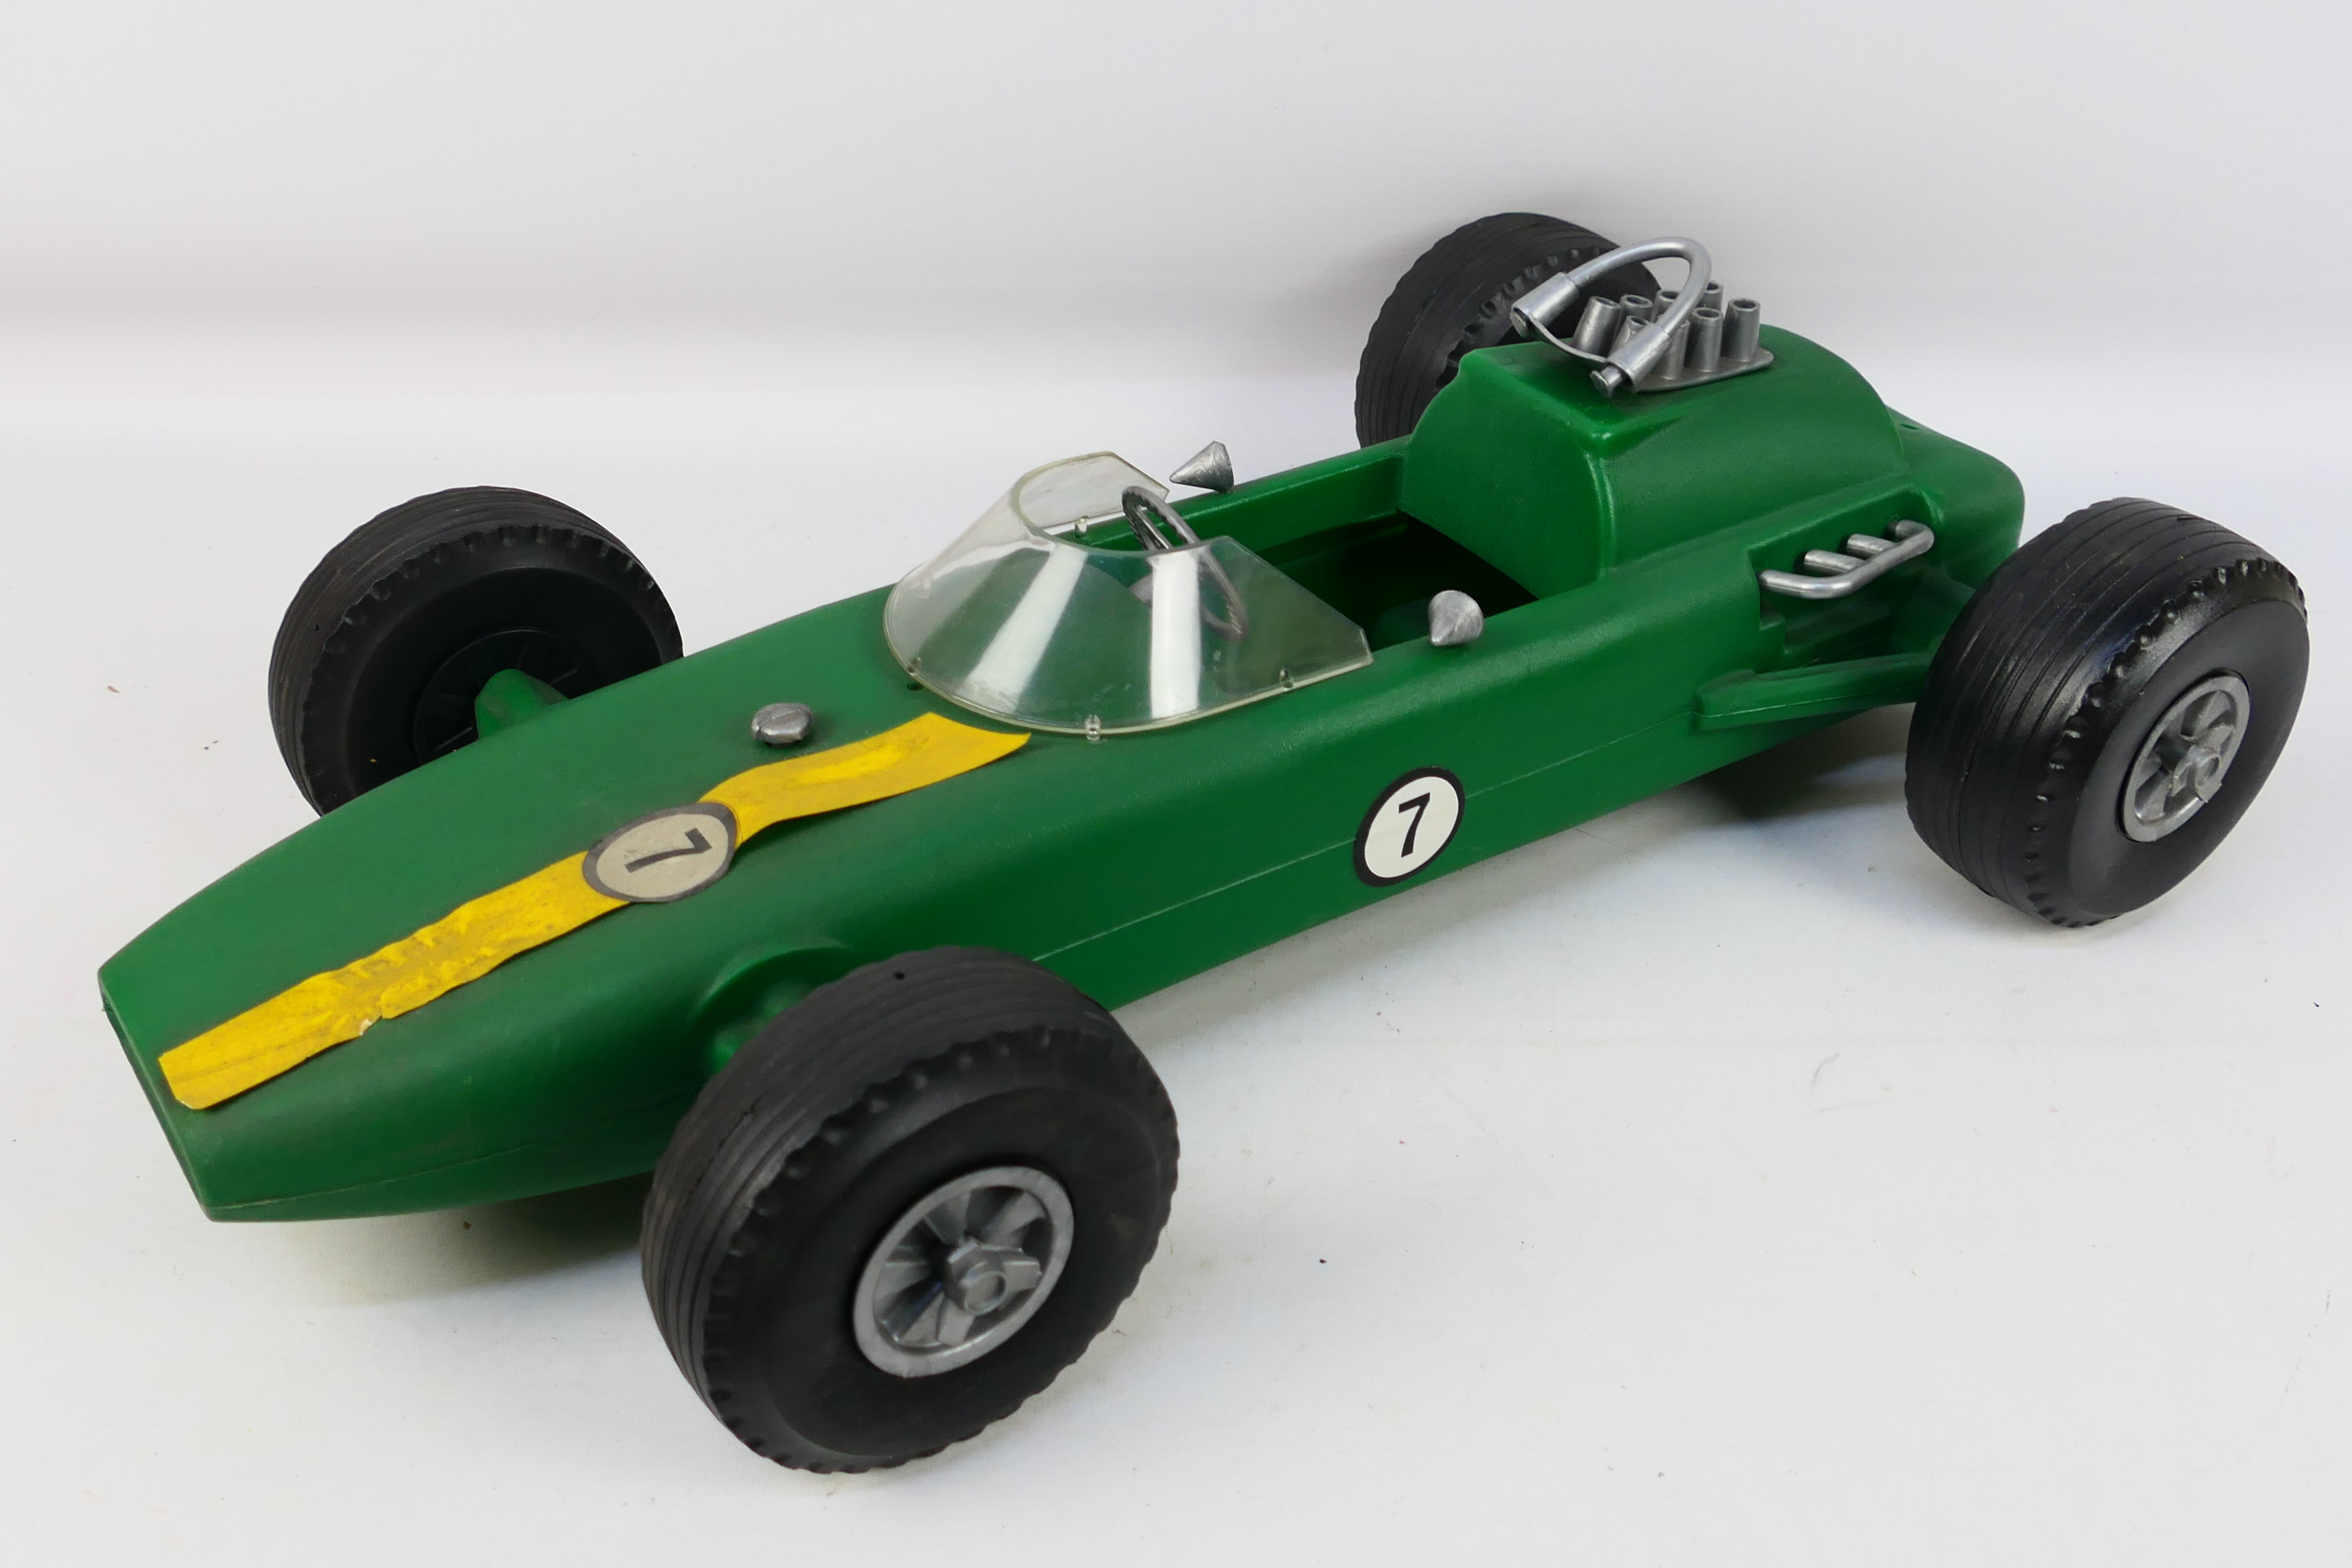 Palitoy - Action Man - An Action Man Grange Prix Racing Car (#34810) 60cm long This item is the car - Image 7 of 9